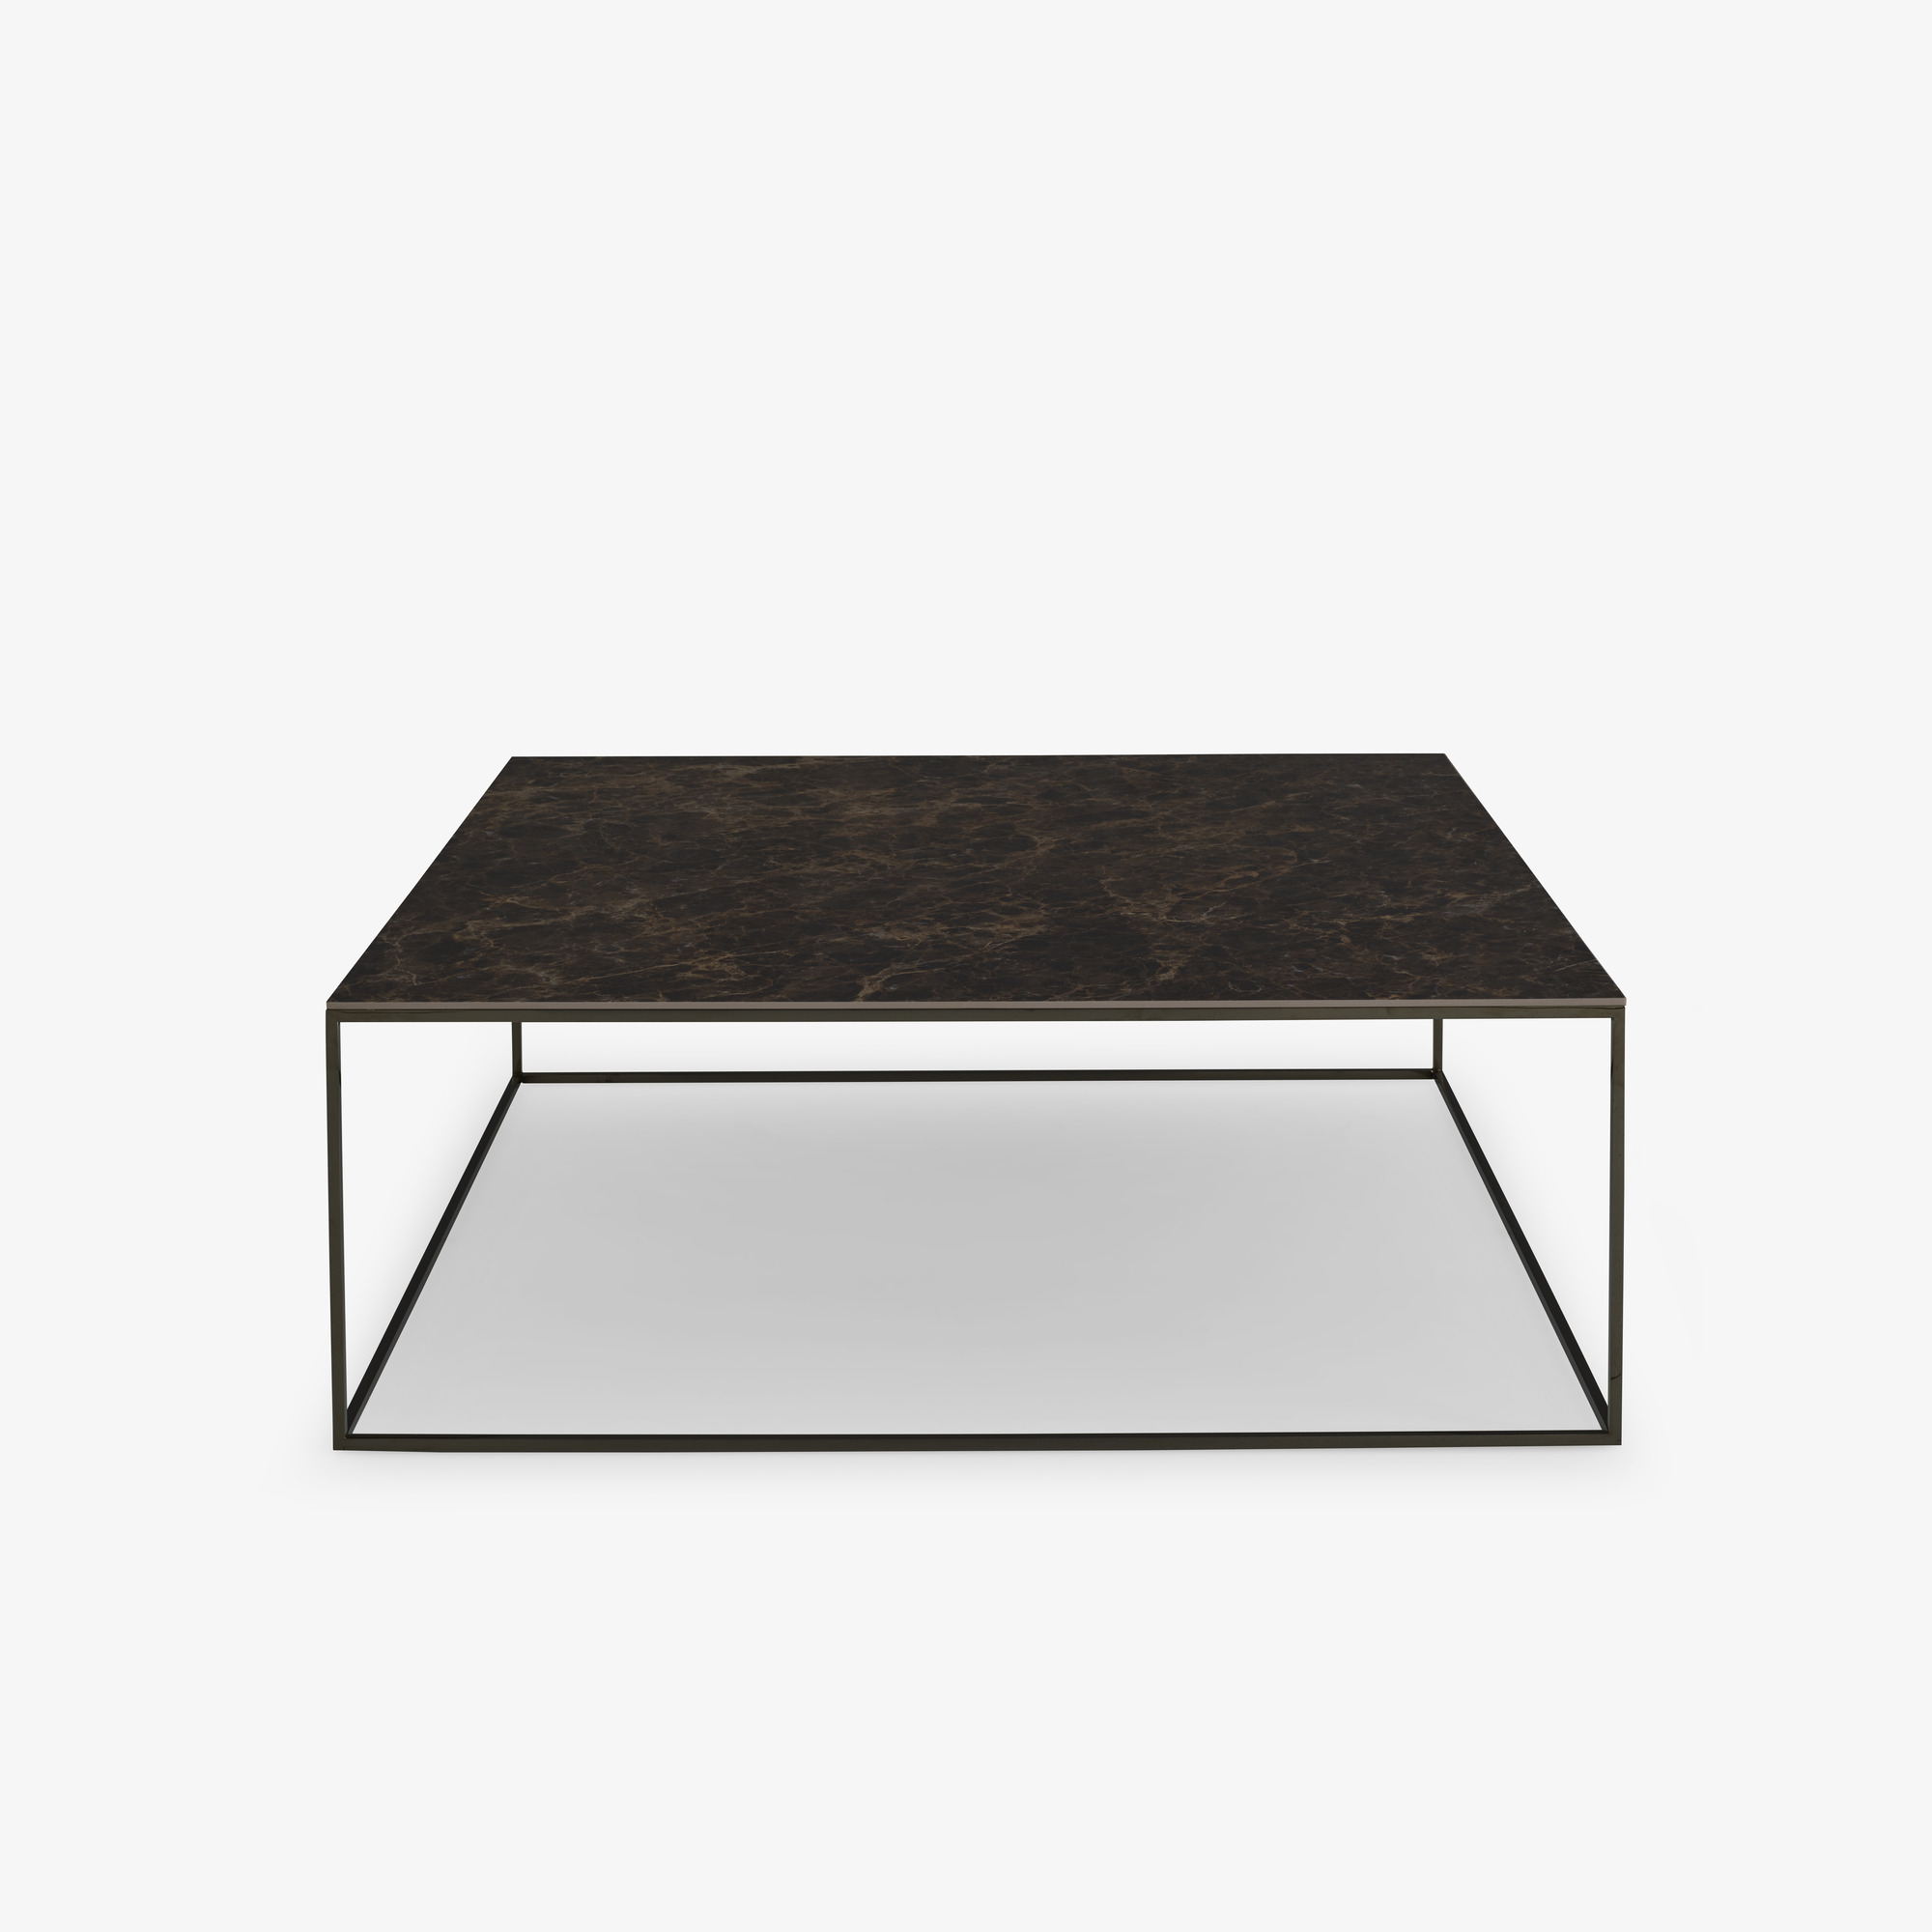 Image Low table - large - 1